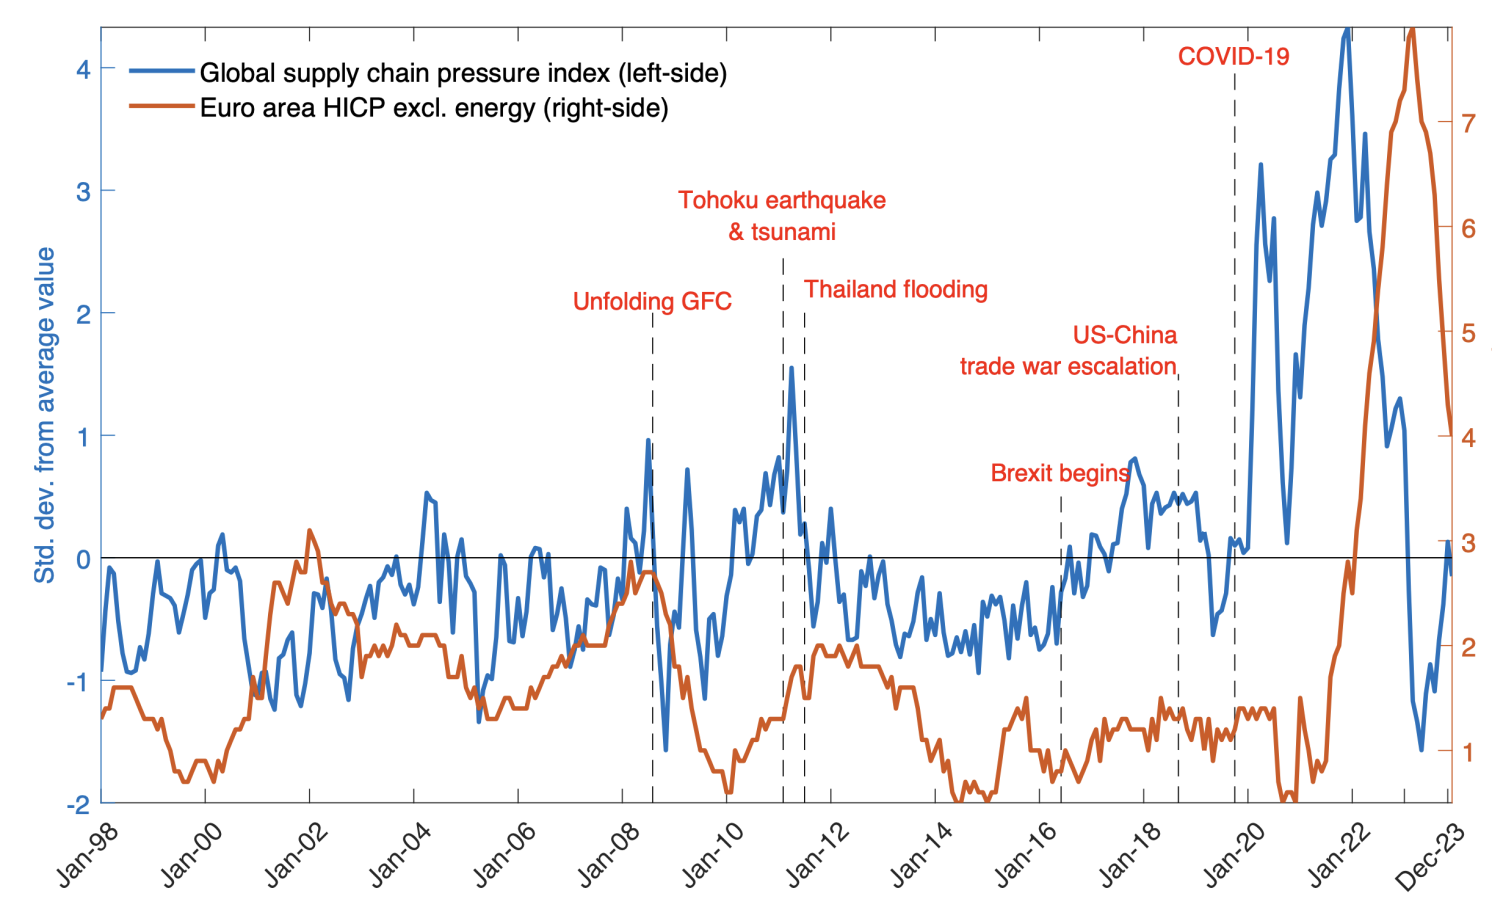 Figure 1 Global supply chain pressures were at historically elevated levels during and after the pandemic crisis